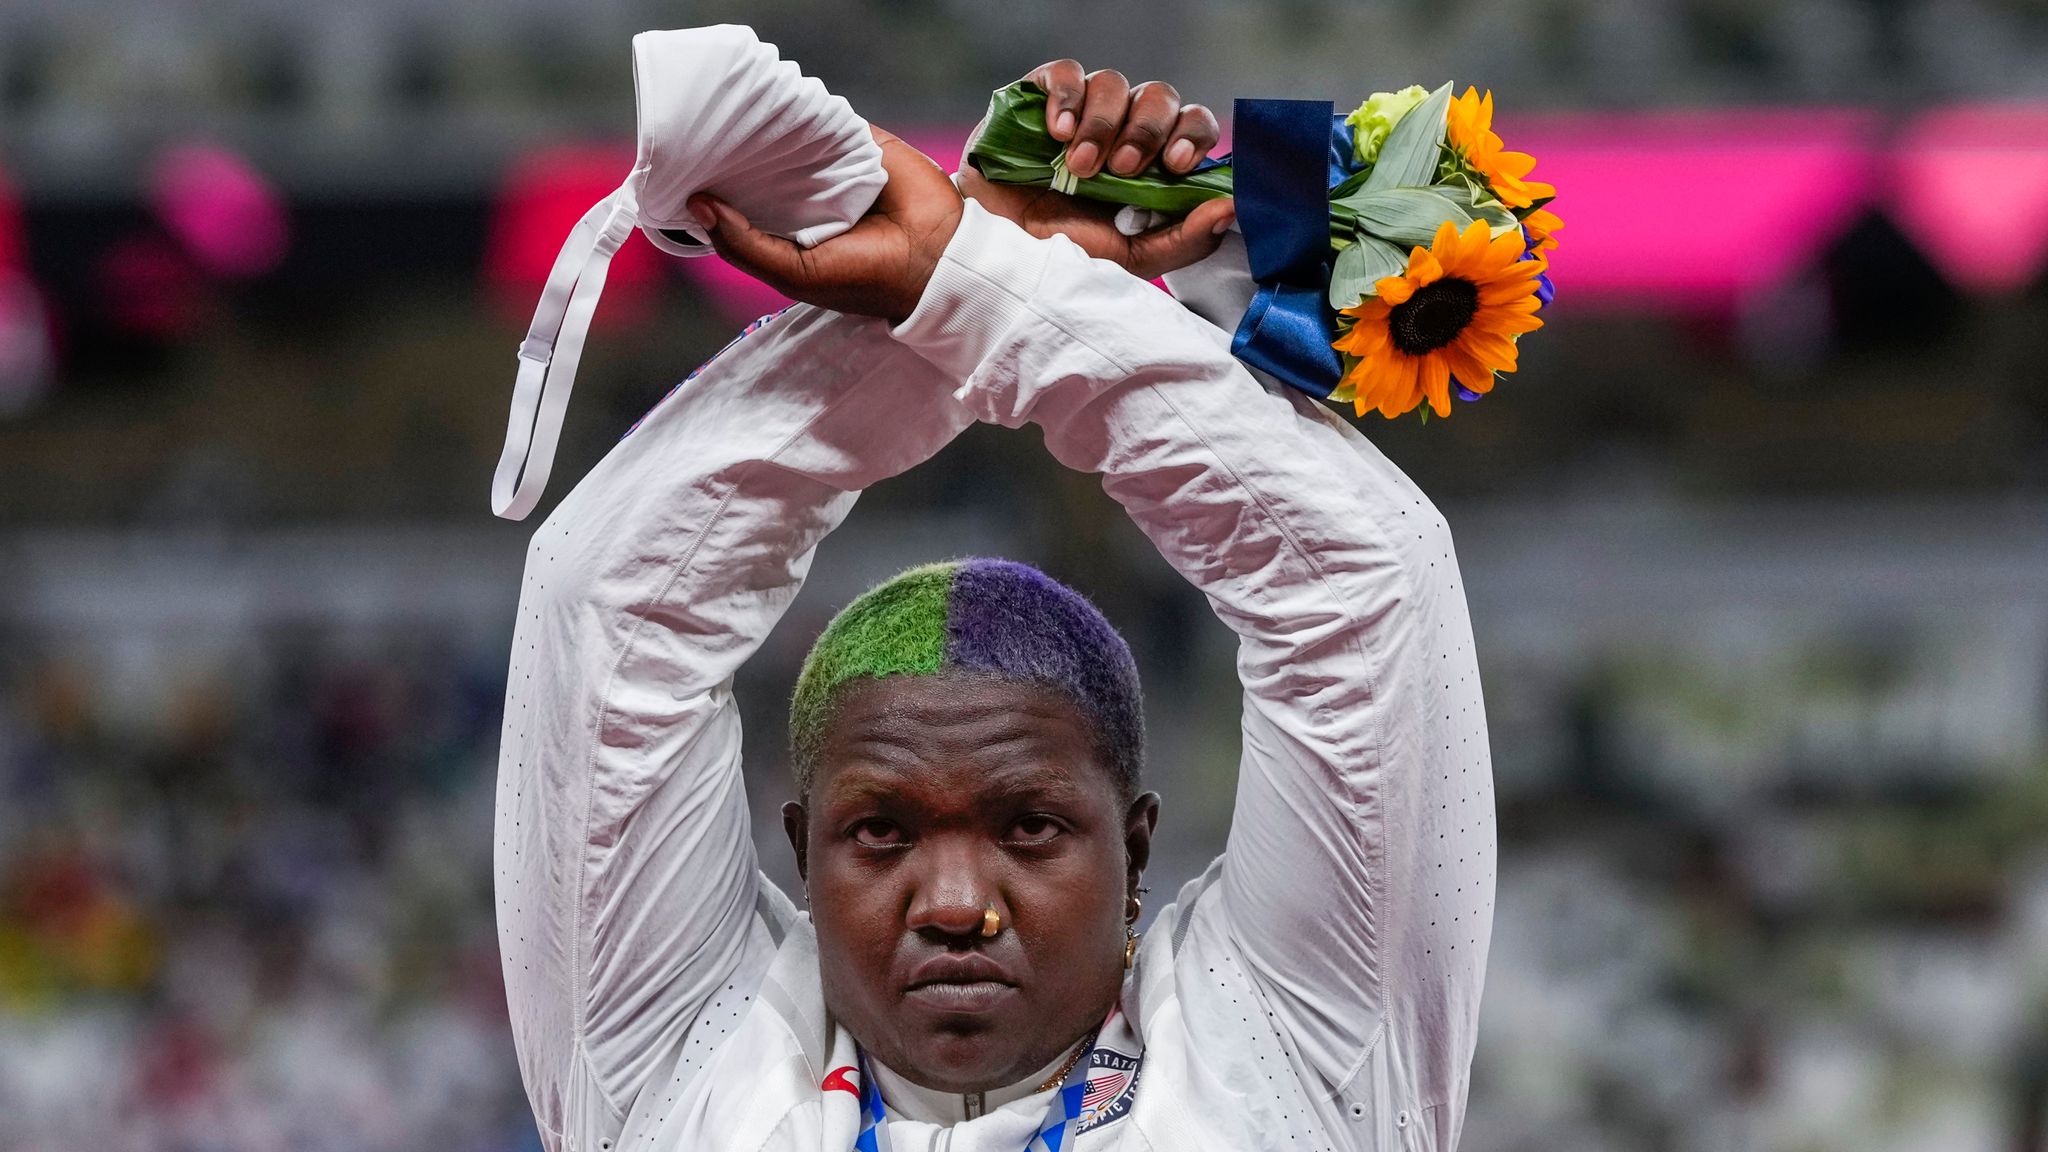 Commonwealth Games 2022 Athletes will be free to protest on the podium Athletics News Sky Sports